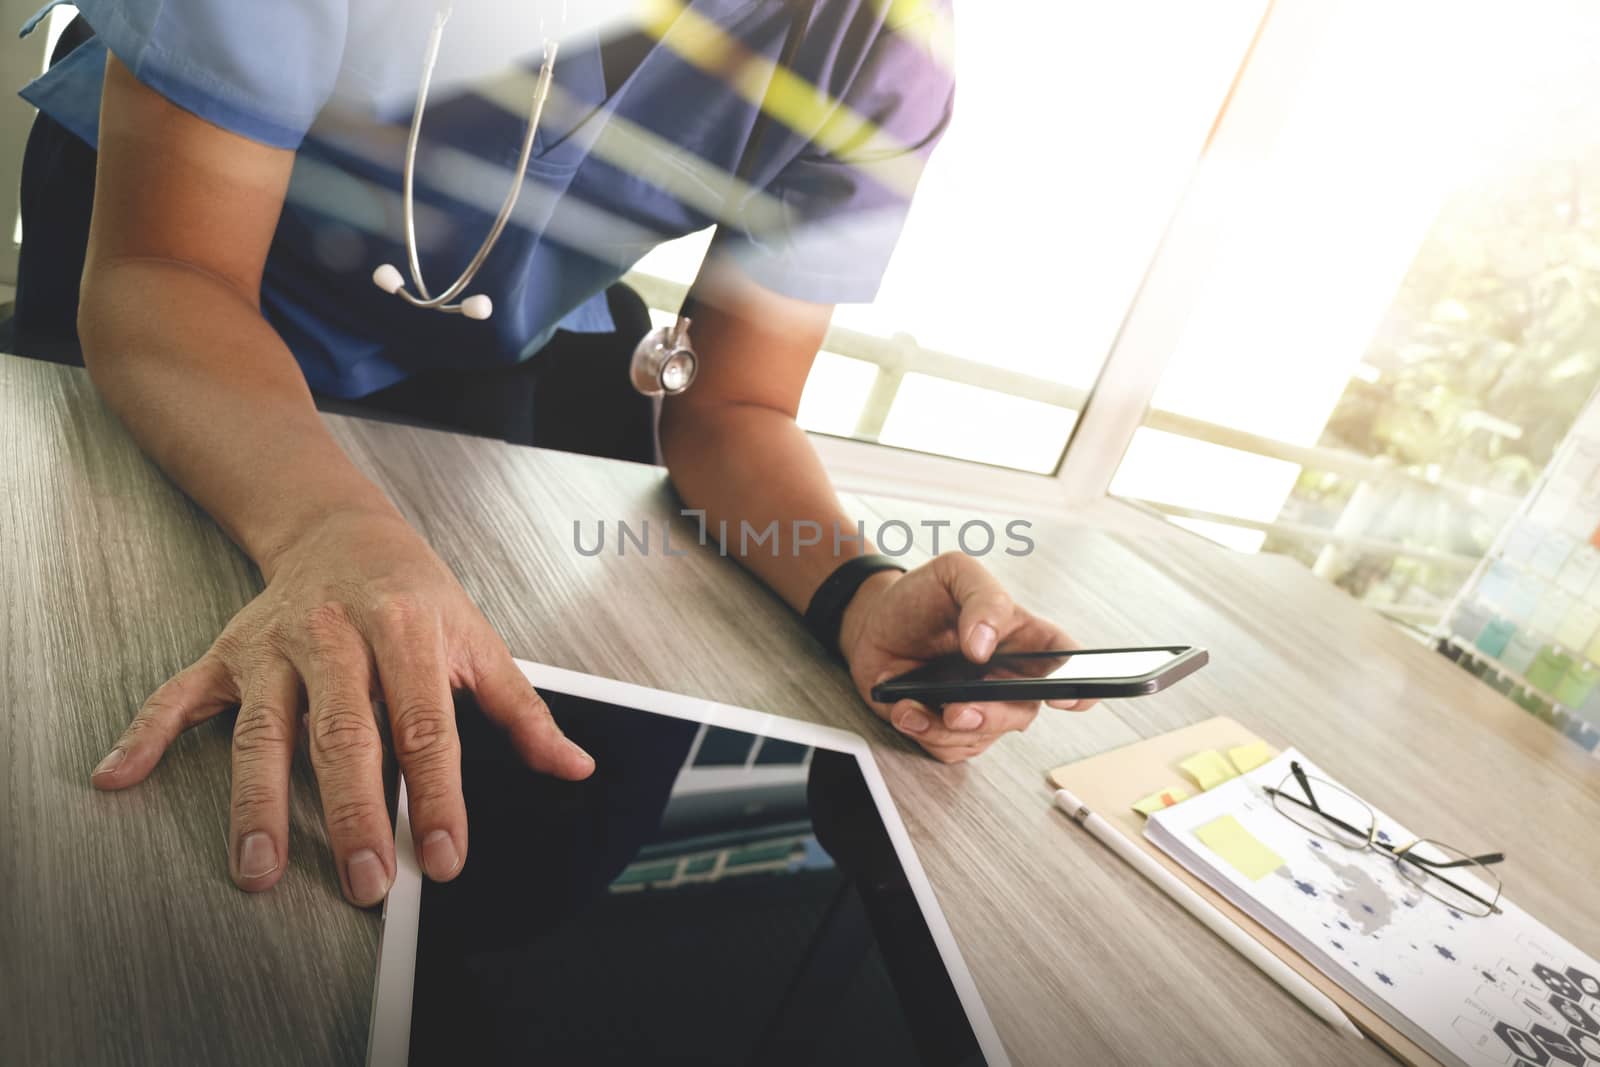 Medicine doctor hand working with modern digital tablet computer interface as medical network concept

